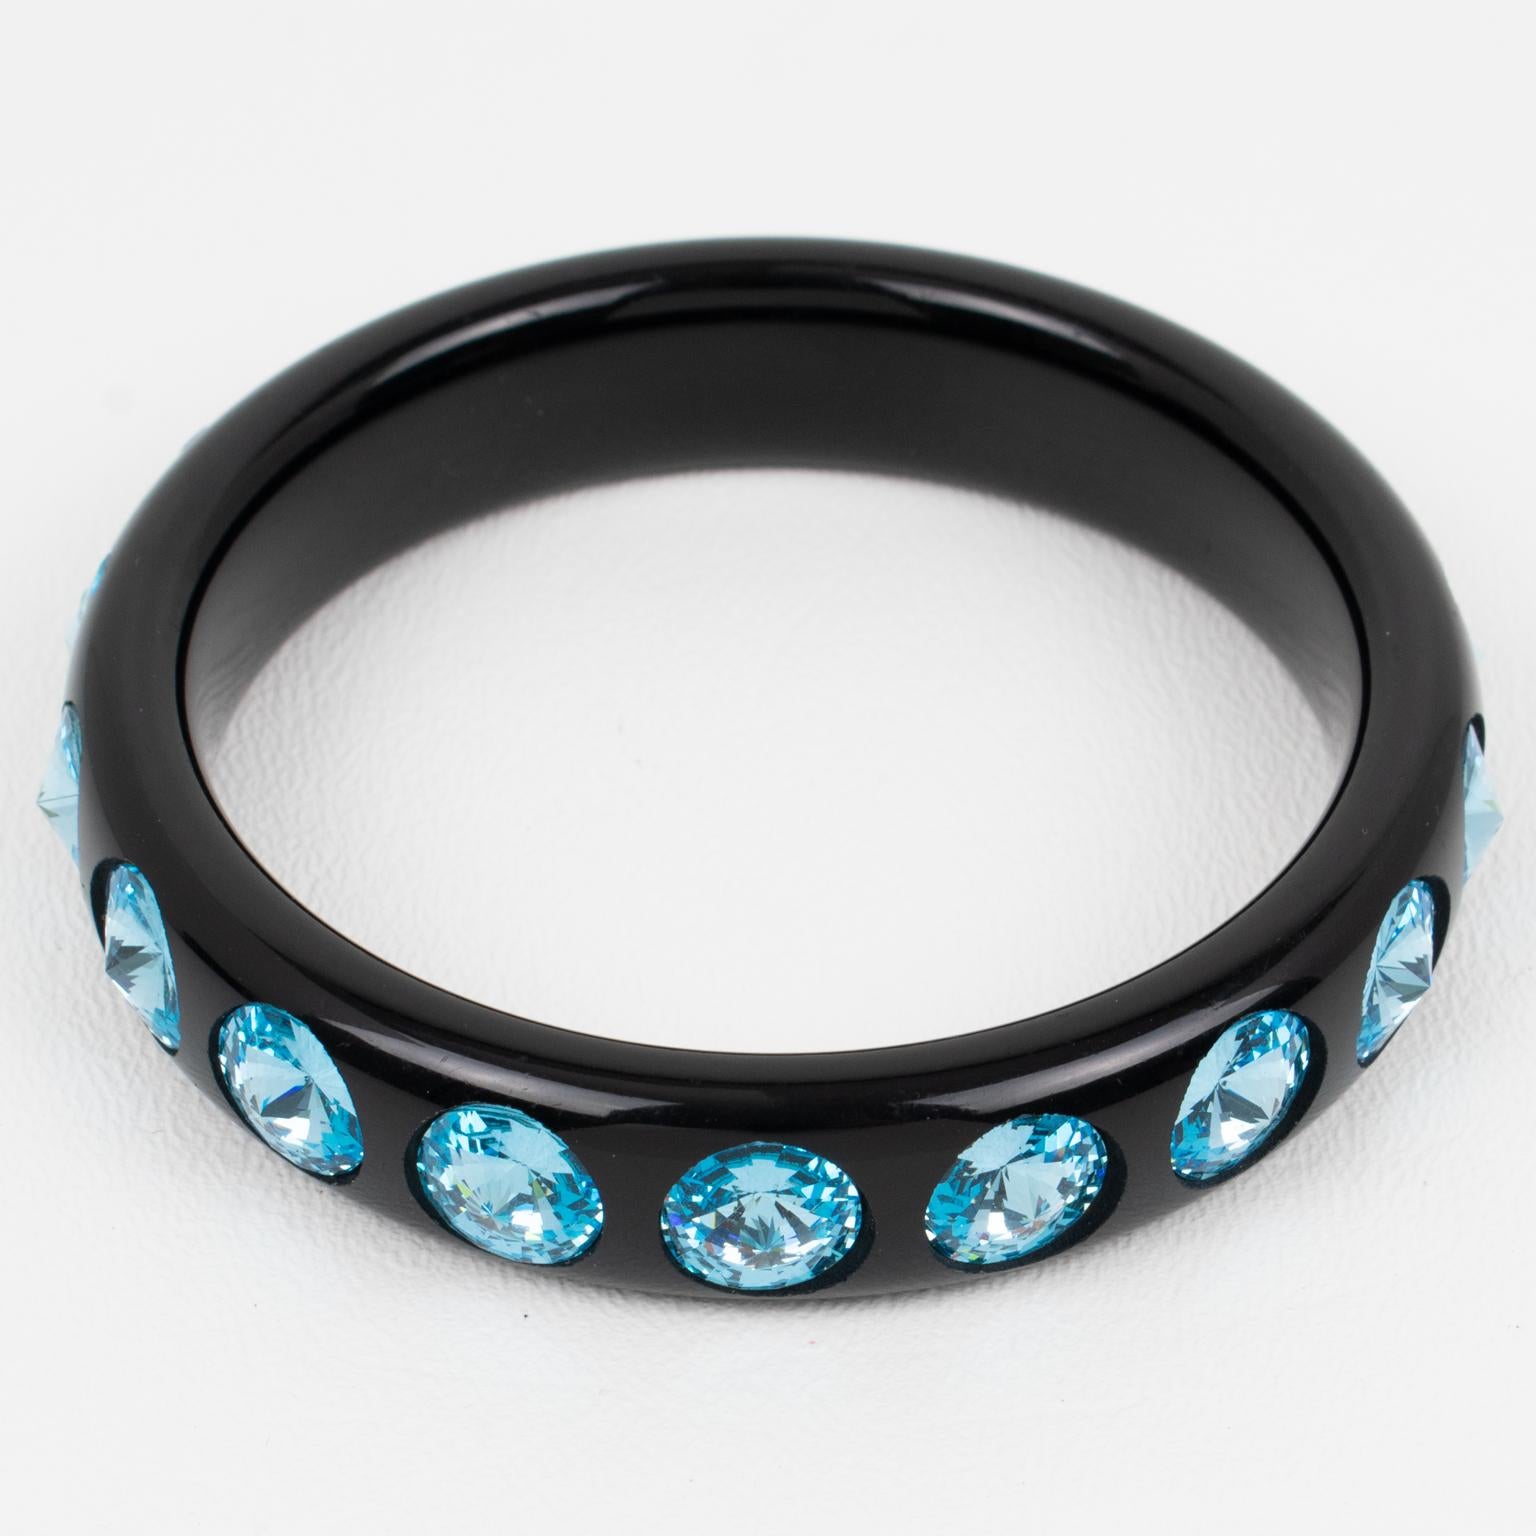 This lovely Lucite bracelet bangle features a domed shape in a true licorice black color. The bangle is ornate with massive baby blue crystal rhinestones. There is no visible maker's mark.
Measurements: Inside across is 2.57 in diameter (6.5 cm) -